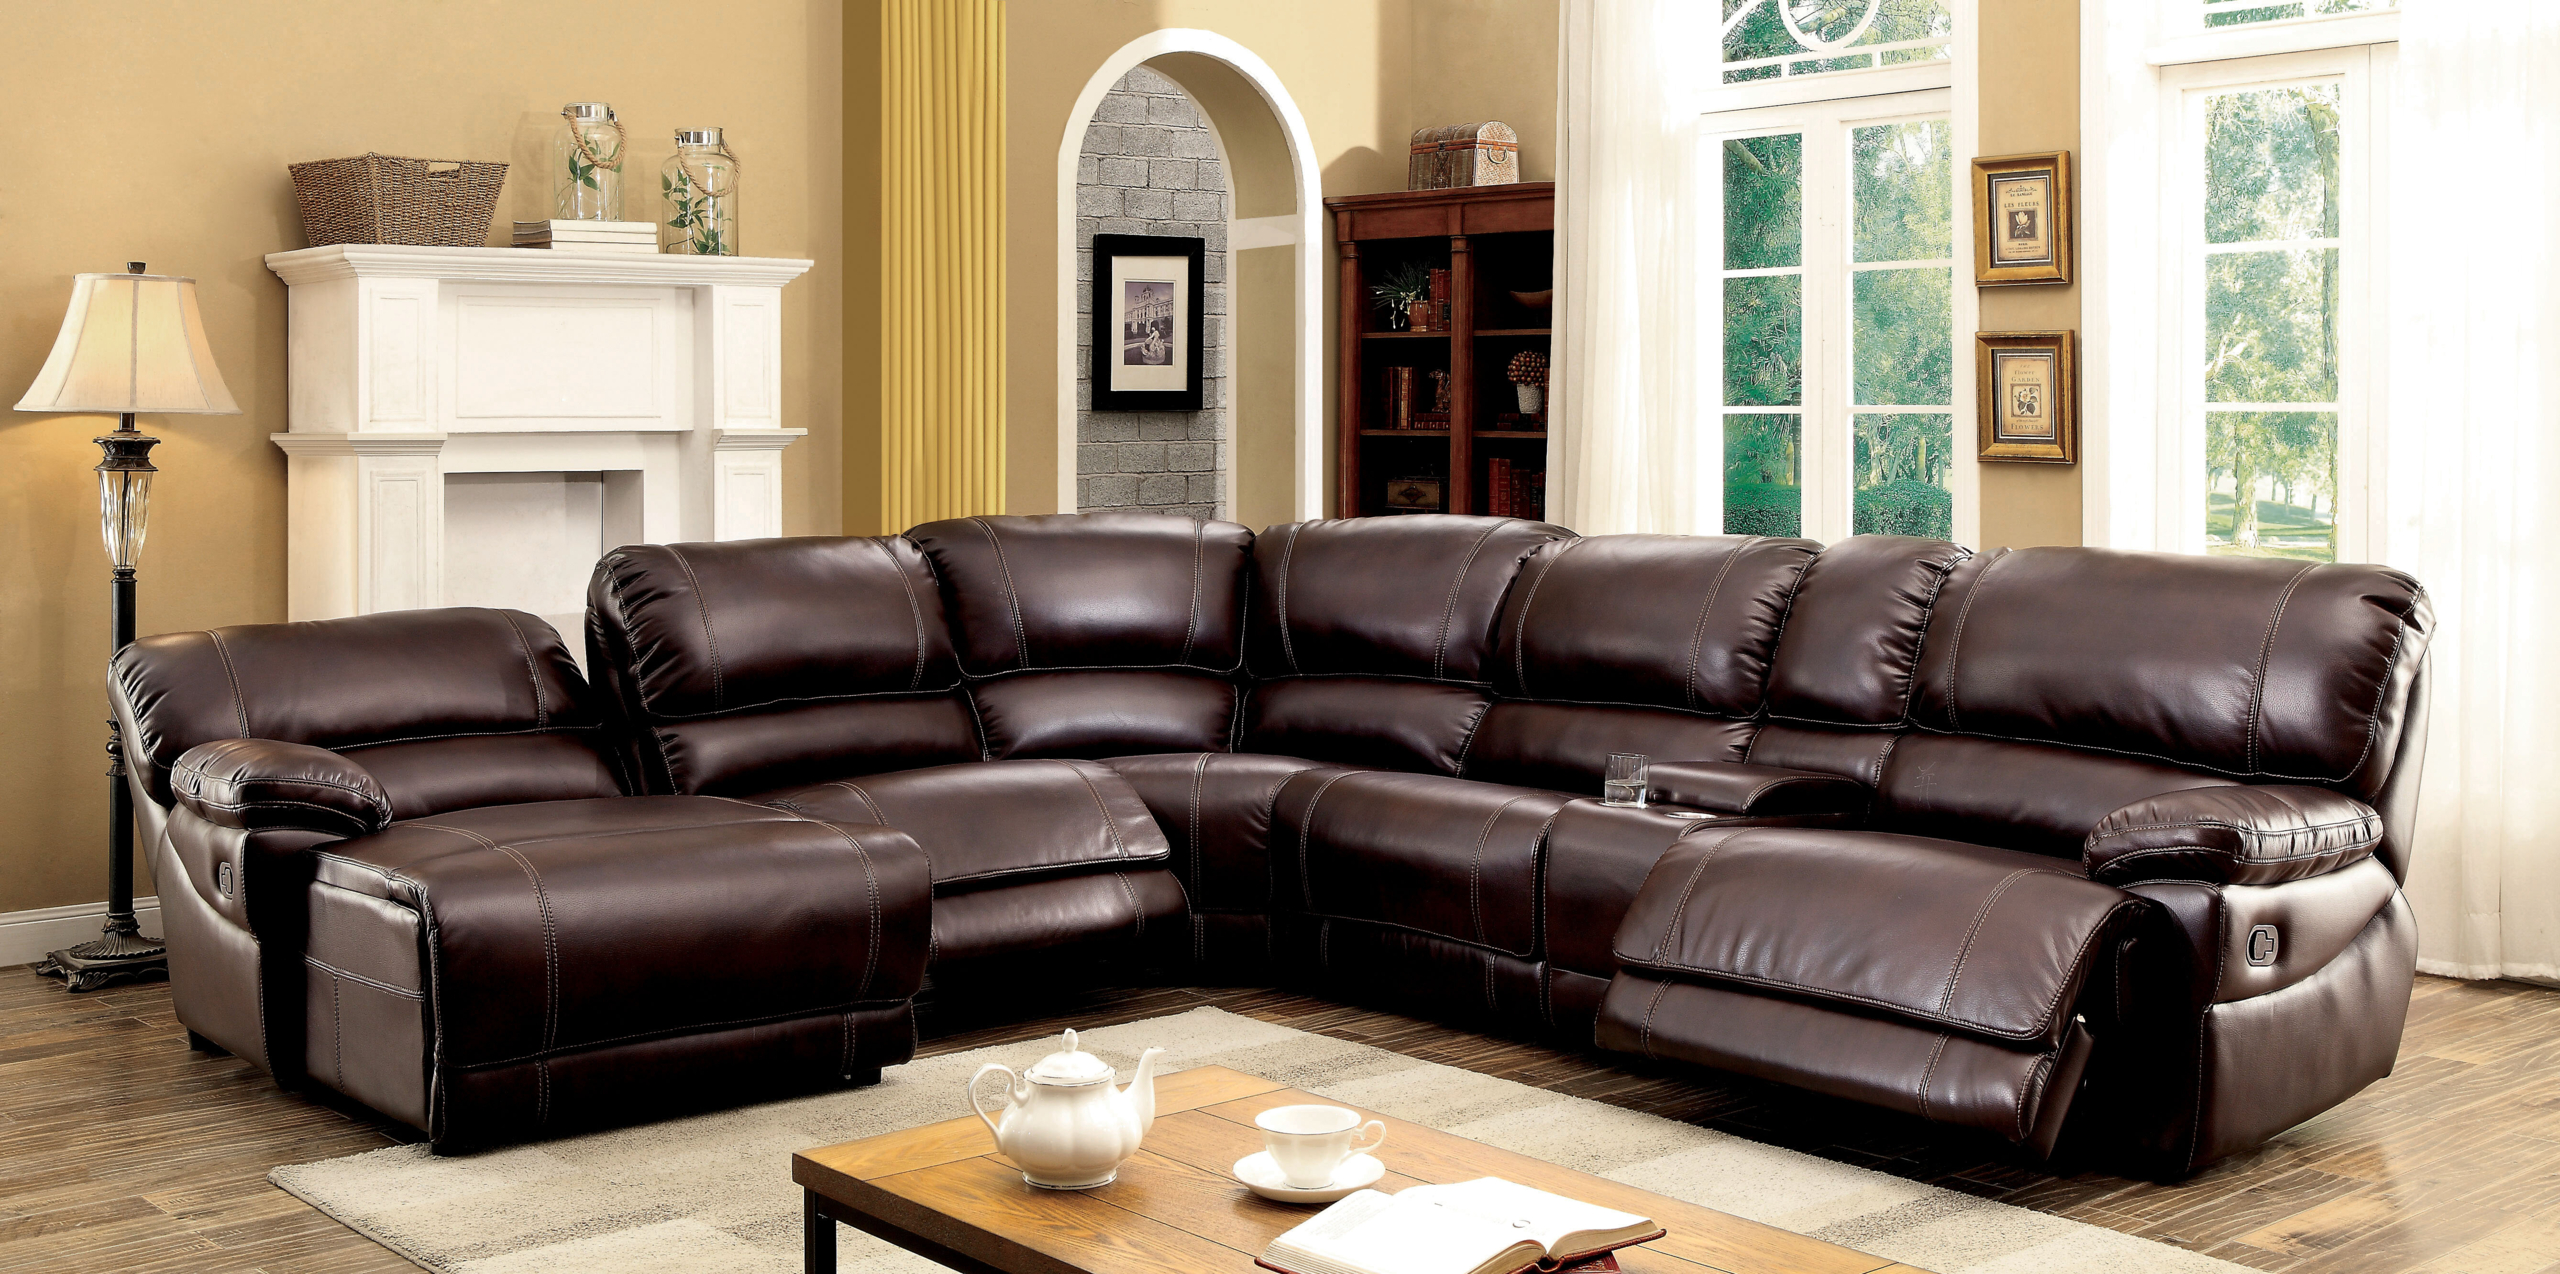 Sectional Sofas With Recliners And Cup, Leather Reclining Sectional With Cup Holders